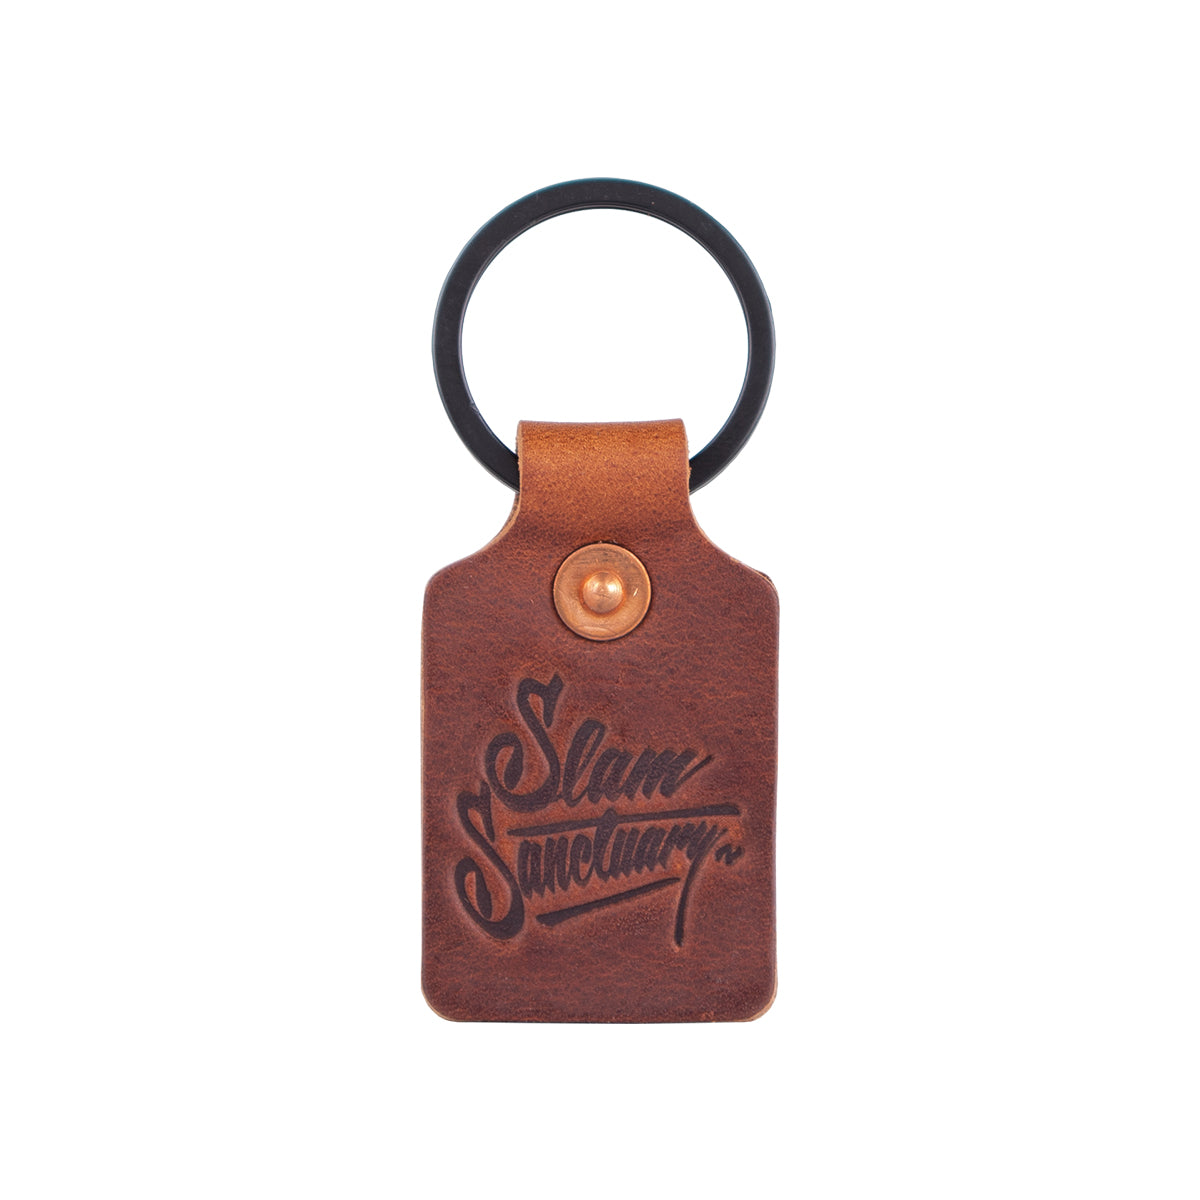 Leather key fob - BROWN